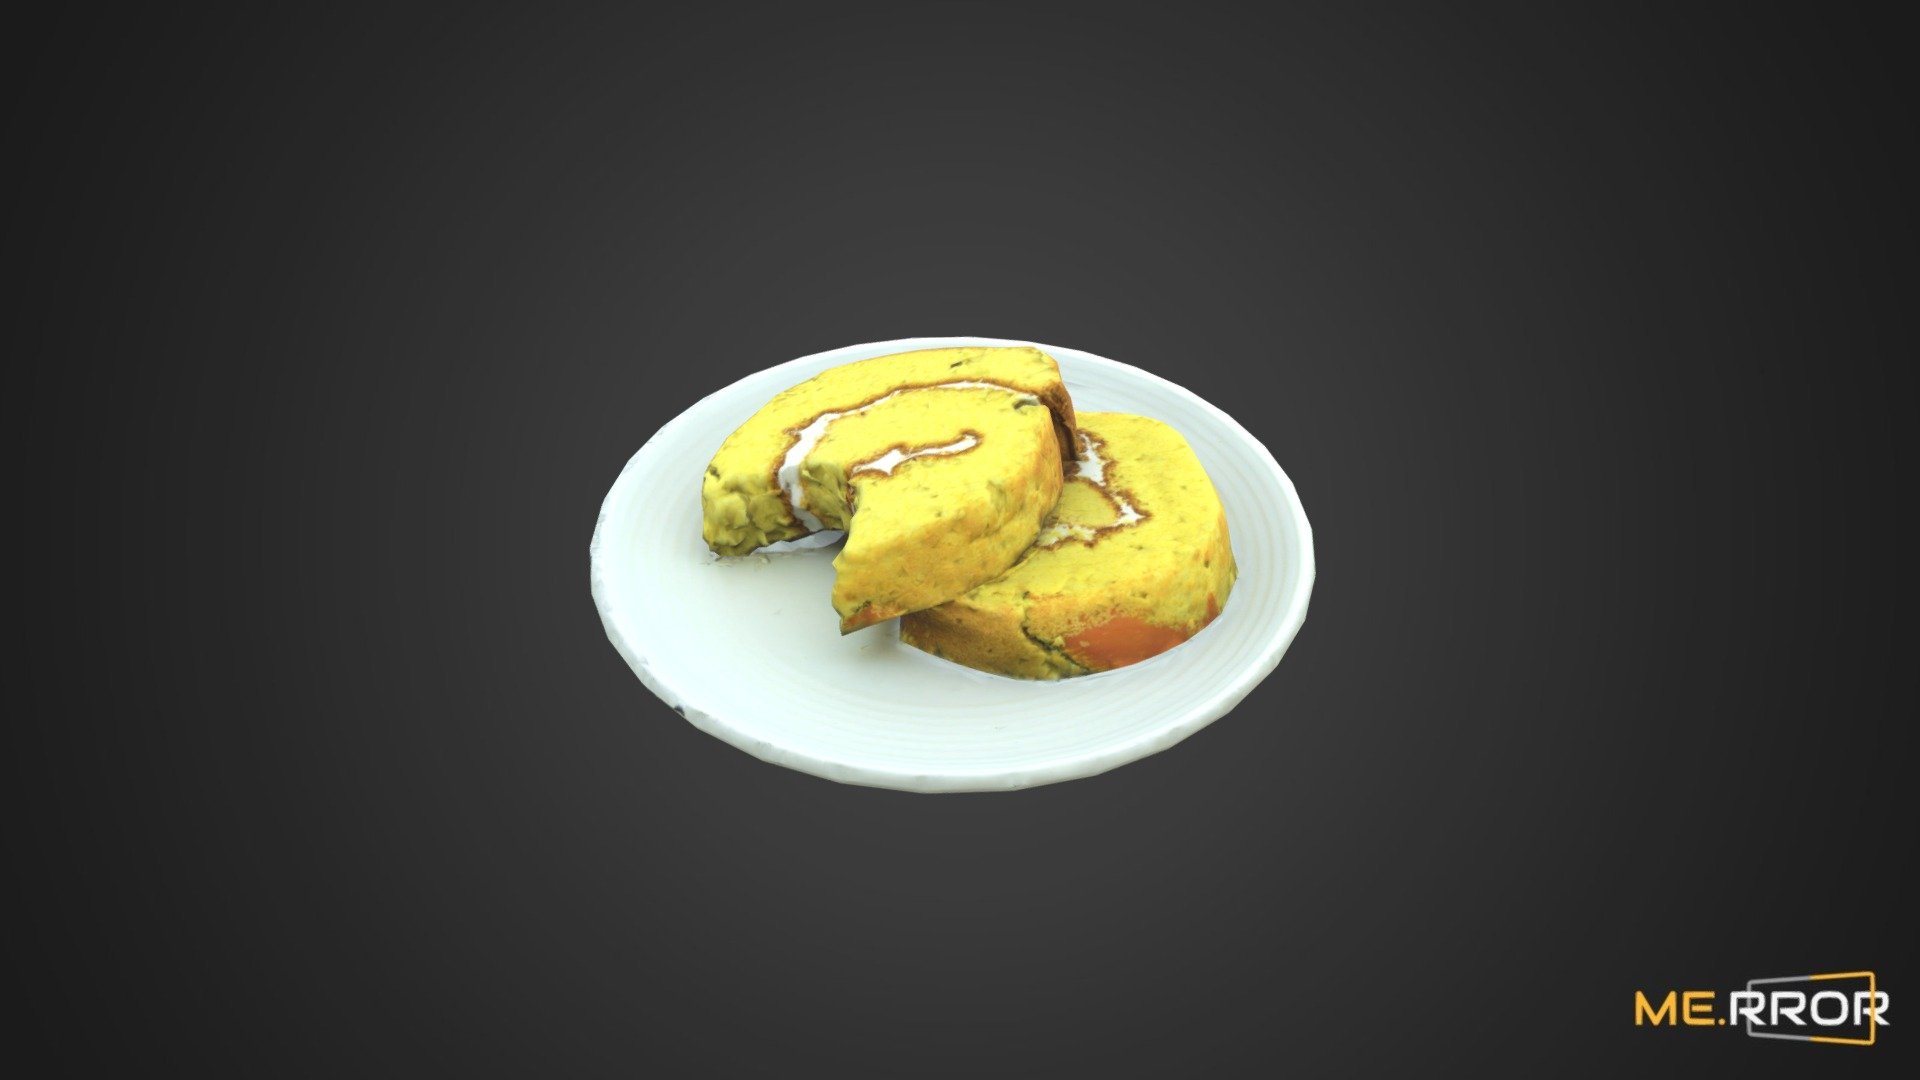 MERROR is a 3D Content PLATFORM which introduces various Asian assets to the 3D world


3DScanning #Photogrametry #ME.RROR - [Game-Ready] Sweet Pumpkin Roll Cake with Bite - Buy Royalty Free 3D model by ME.RROR Studio (@merror) 3d model